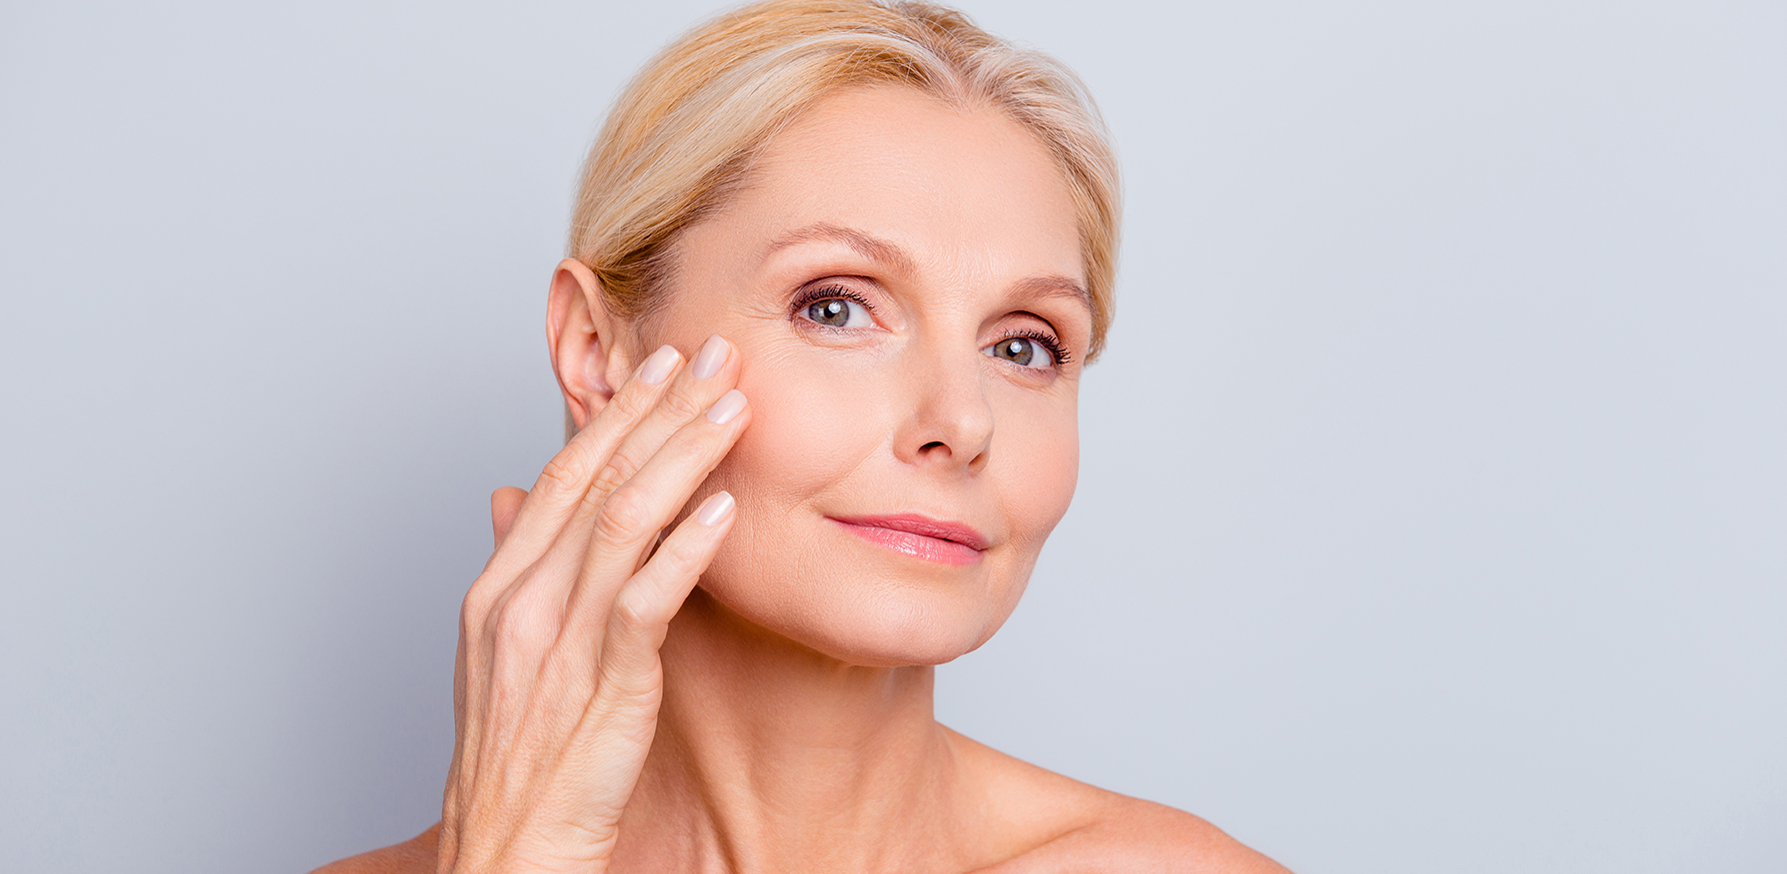 menopause-and-skincare-older-women-with-nice-skin-touching-face